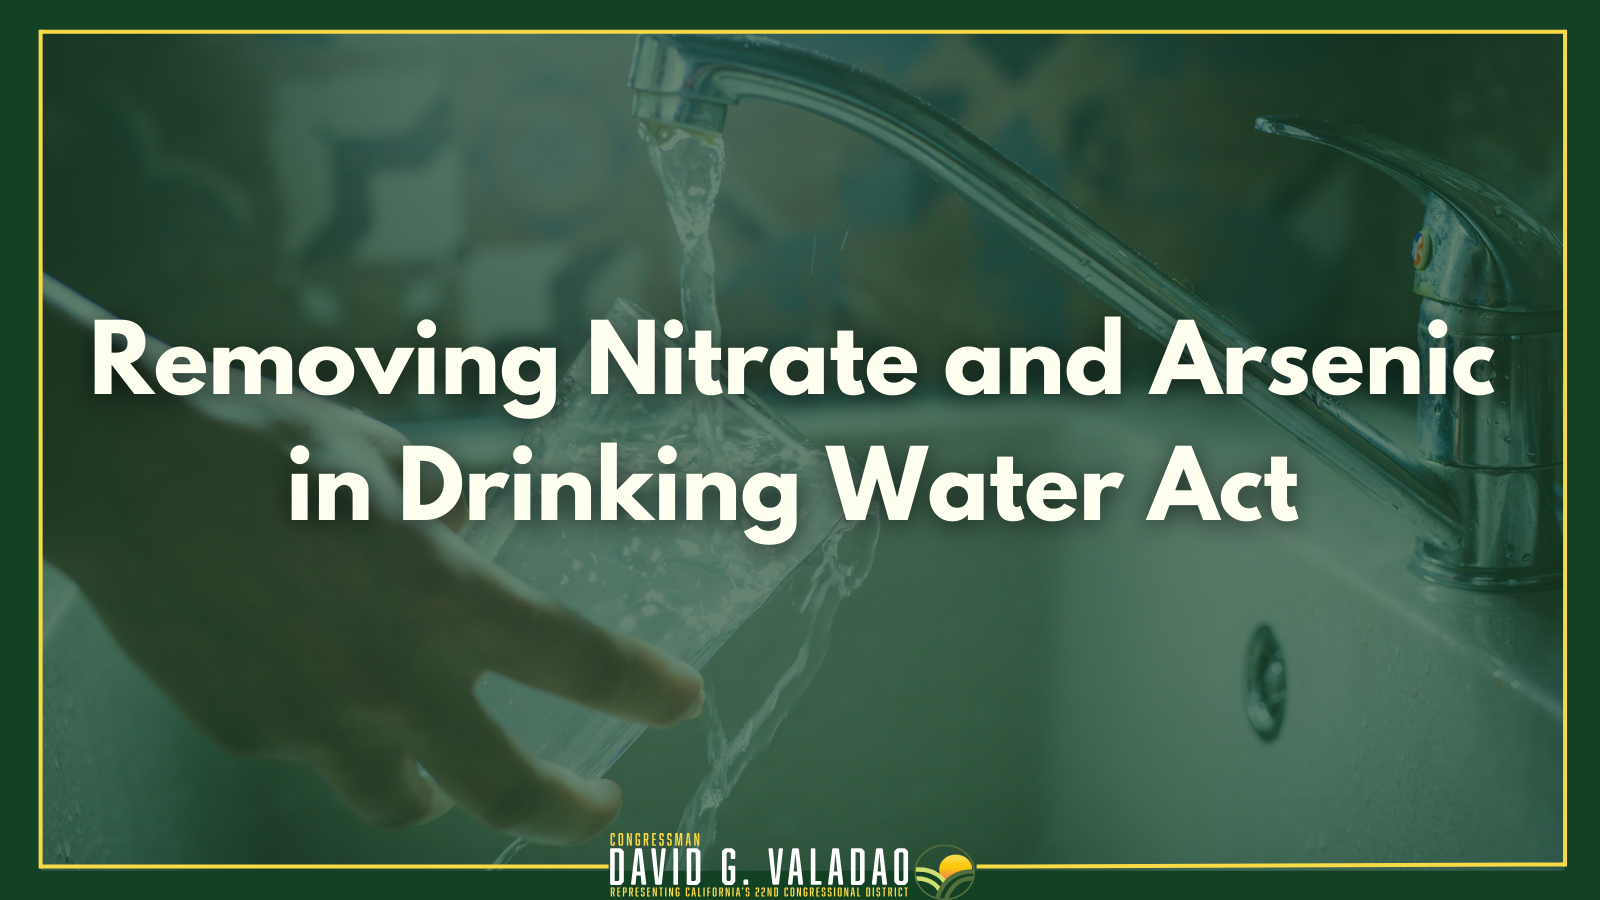 Rep. Valadao joins Rep. Torres to introduce bill to ensure clean drinking water